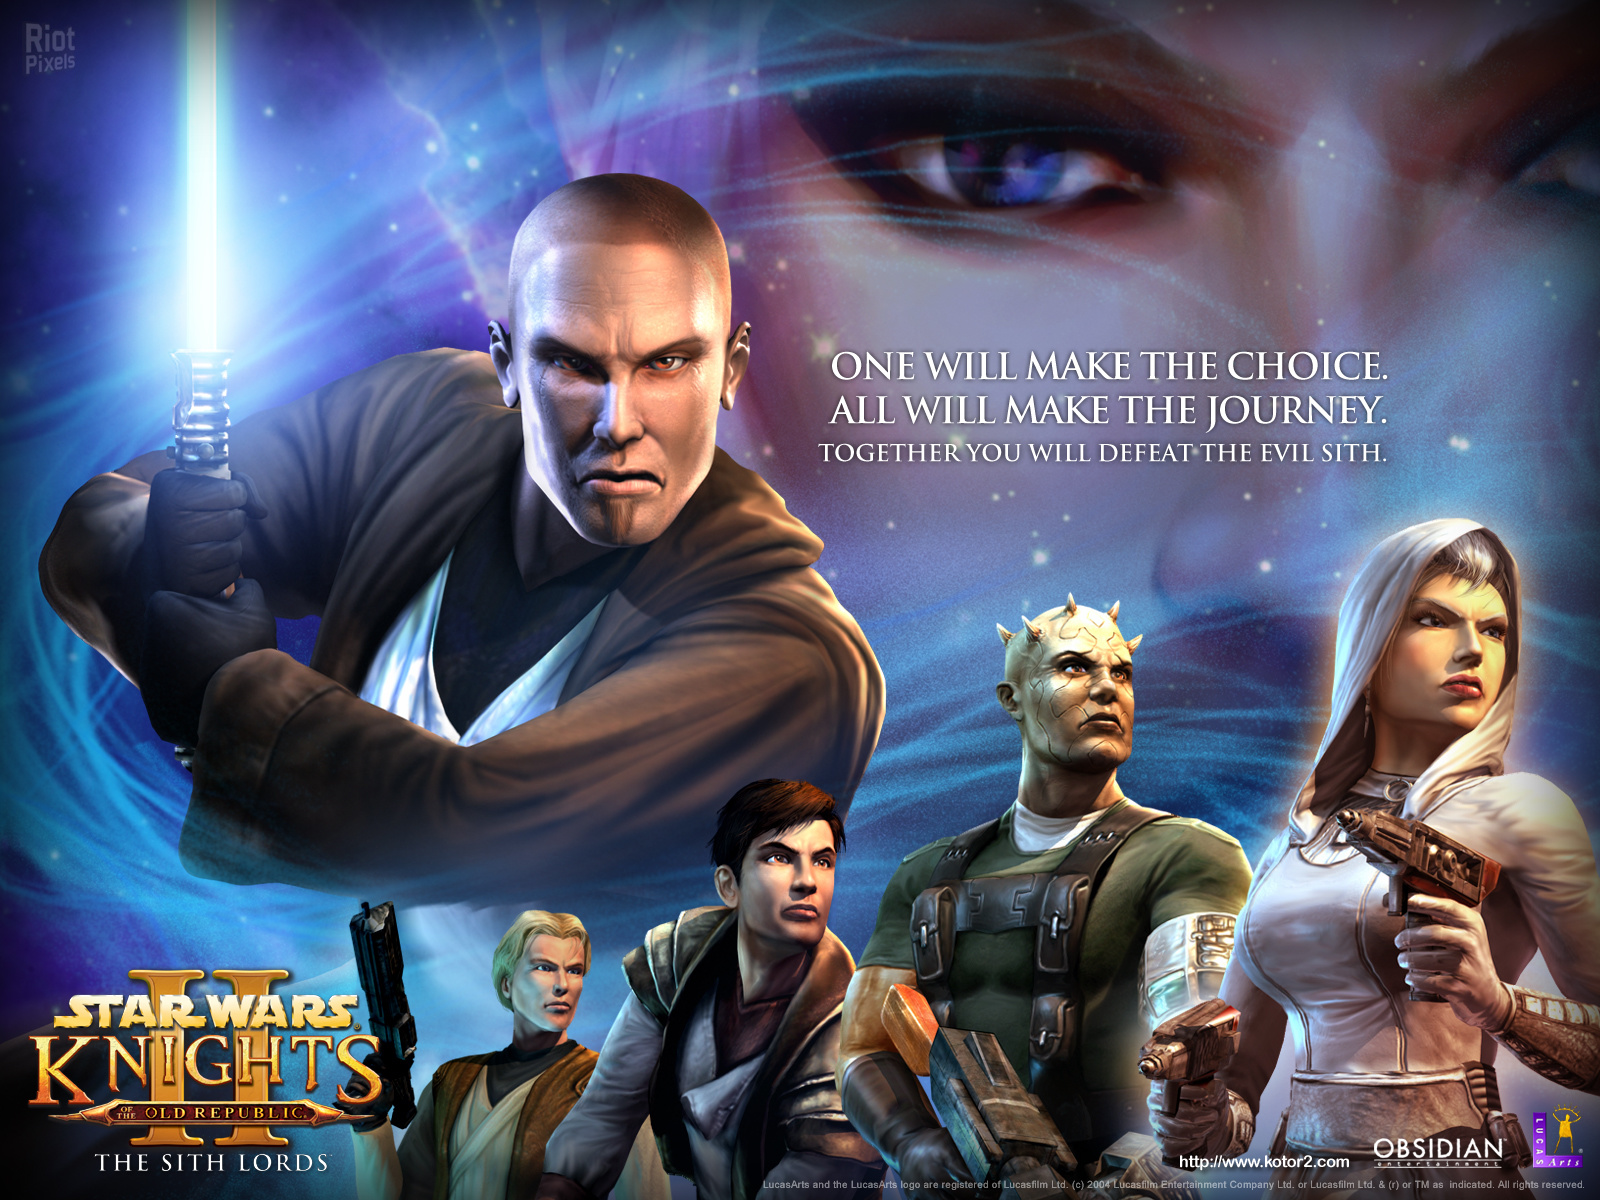 Star wars knight of the old republic 2 русификатор steam фото 100